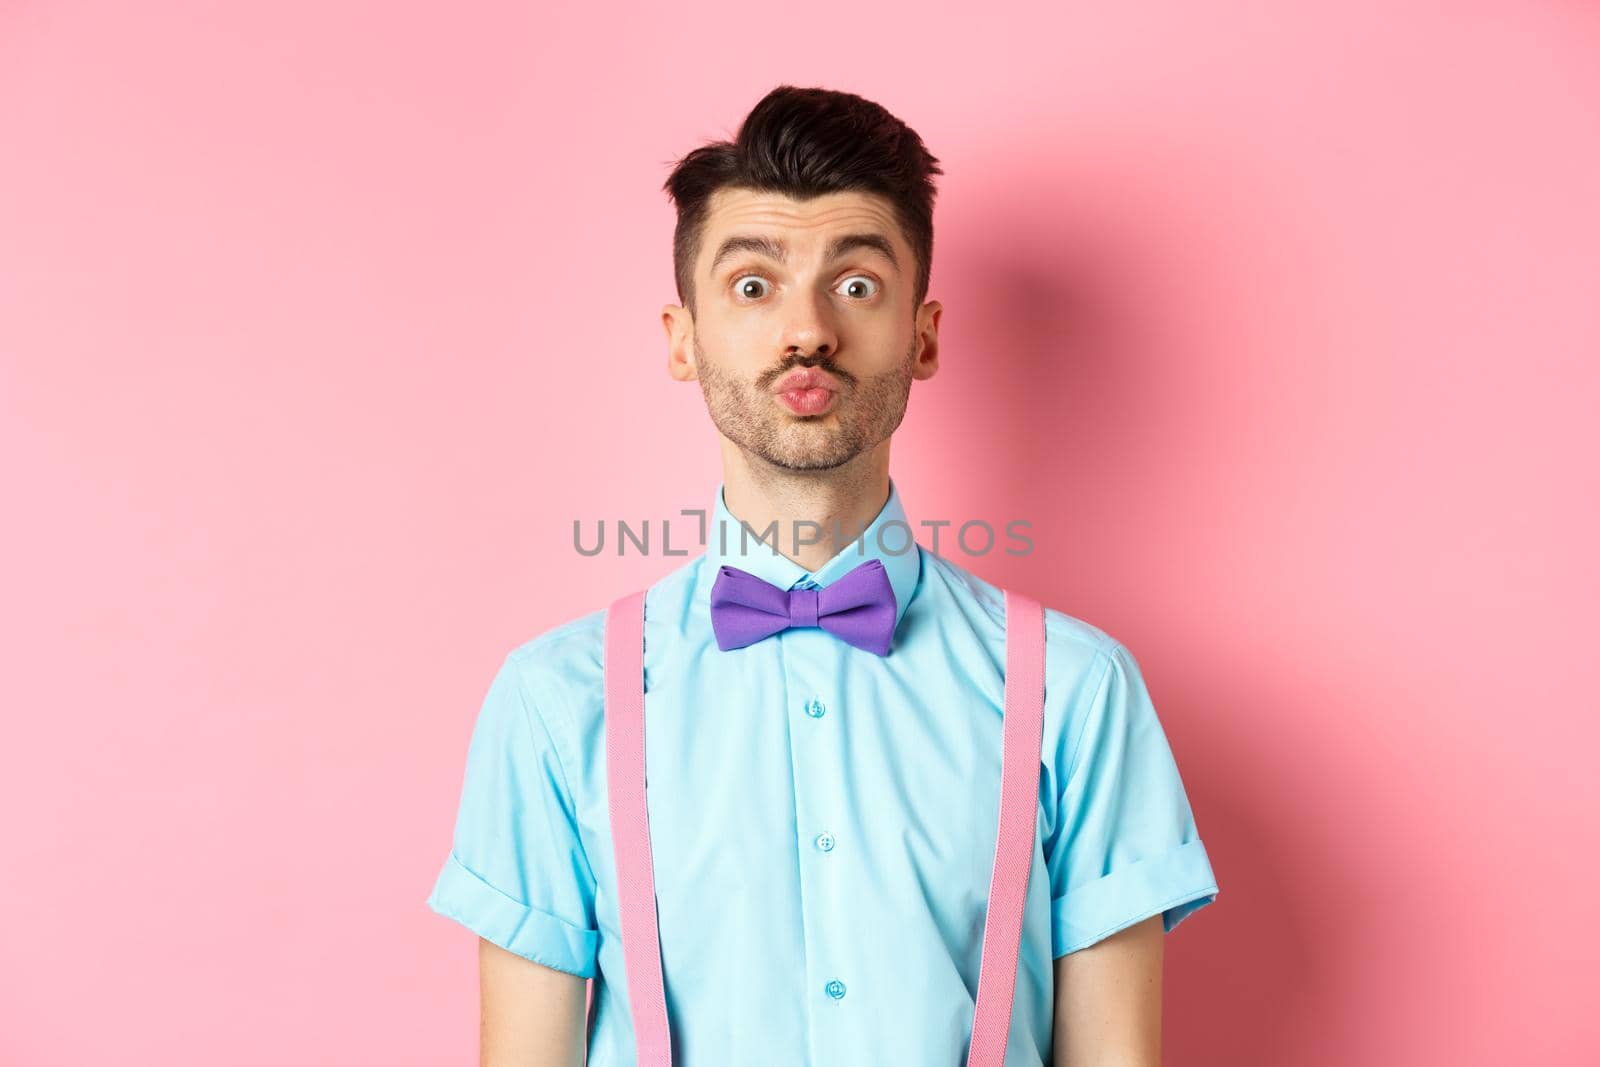 Funny young man waiting for kiss with puckered lips and silly face, standing on romantic pink background. Concept of love and Valentines day.